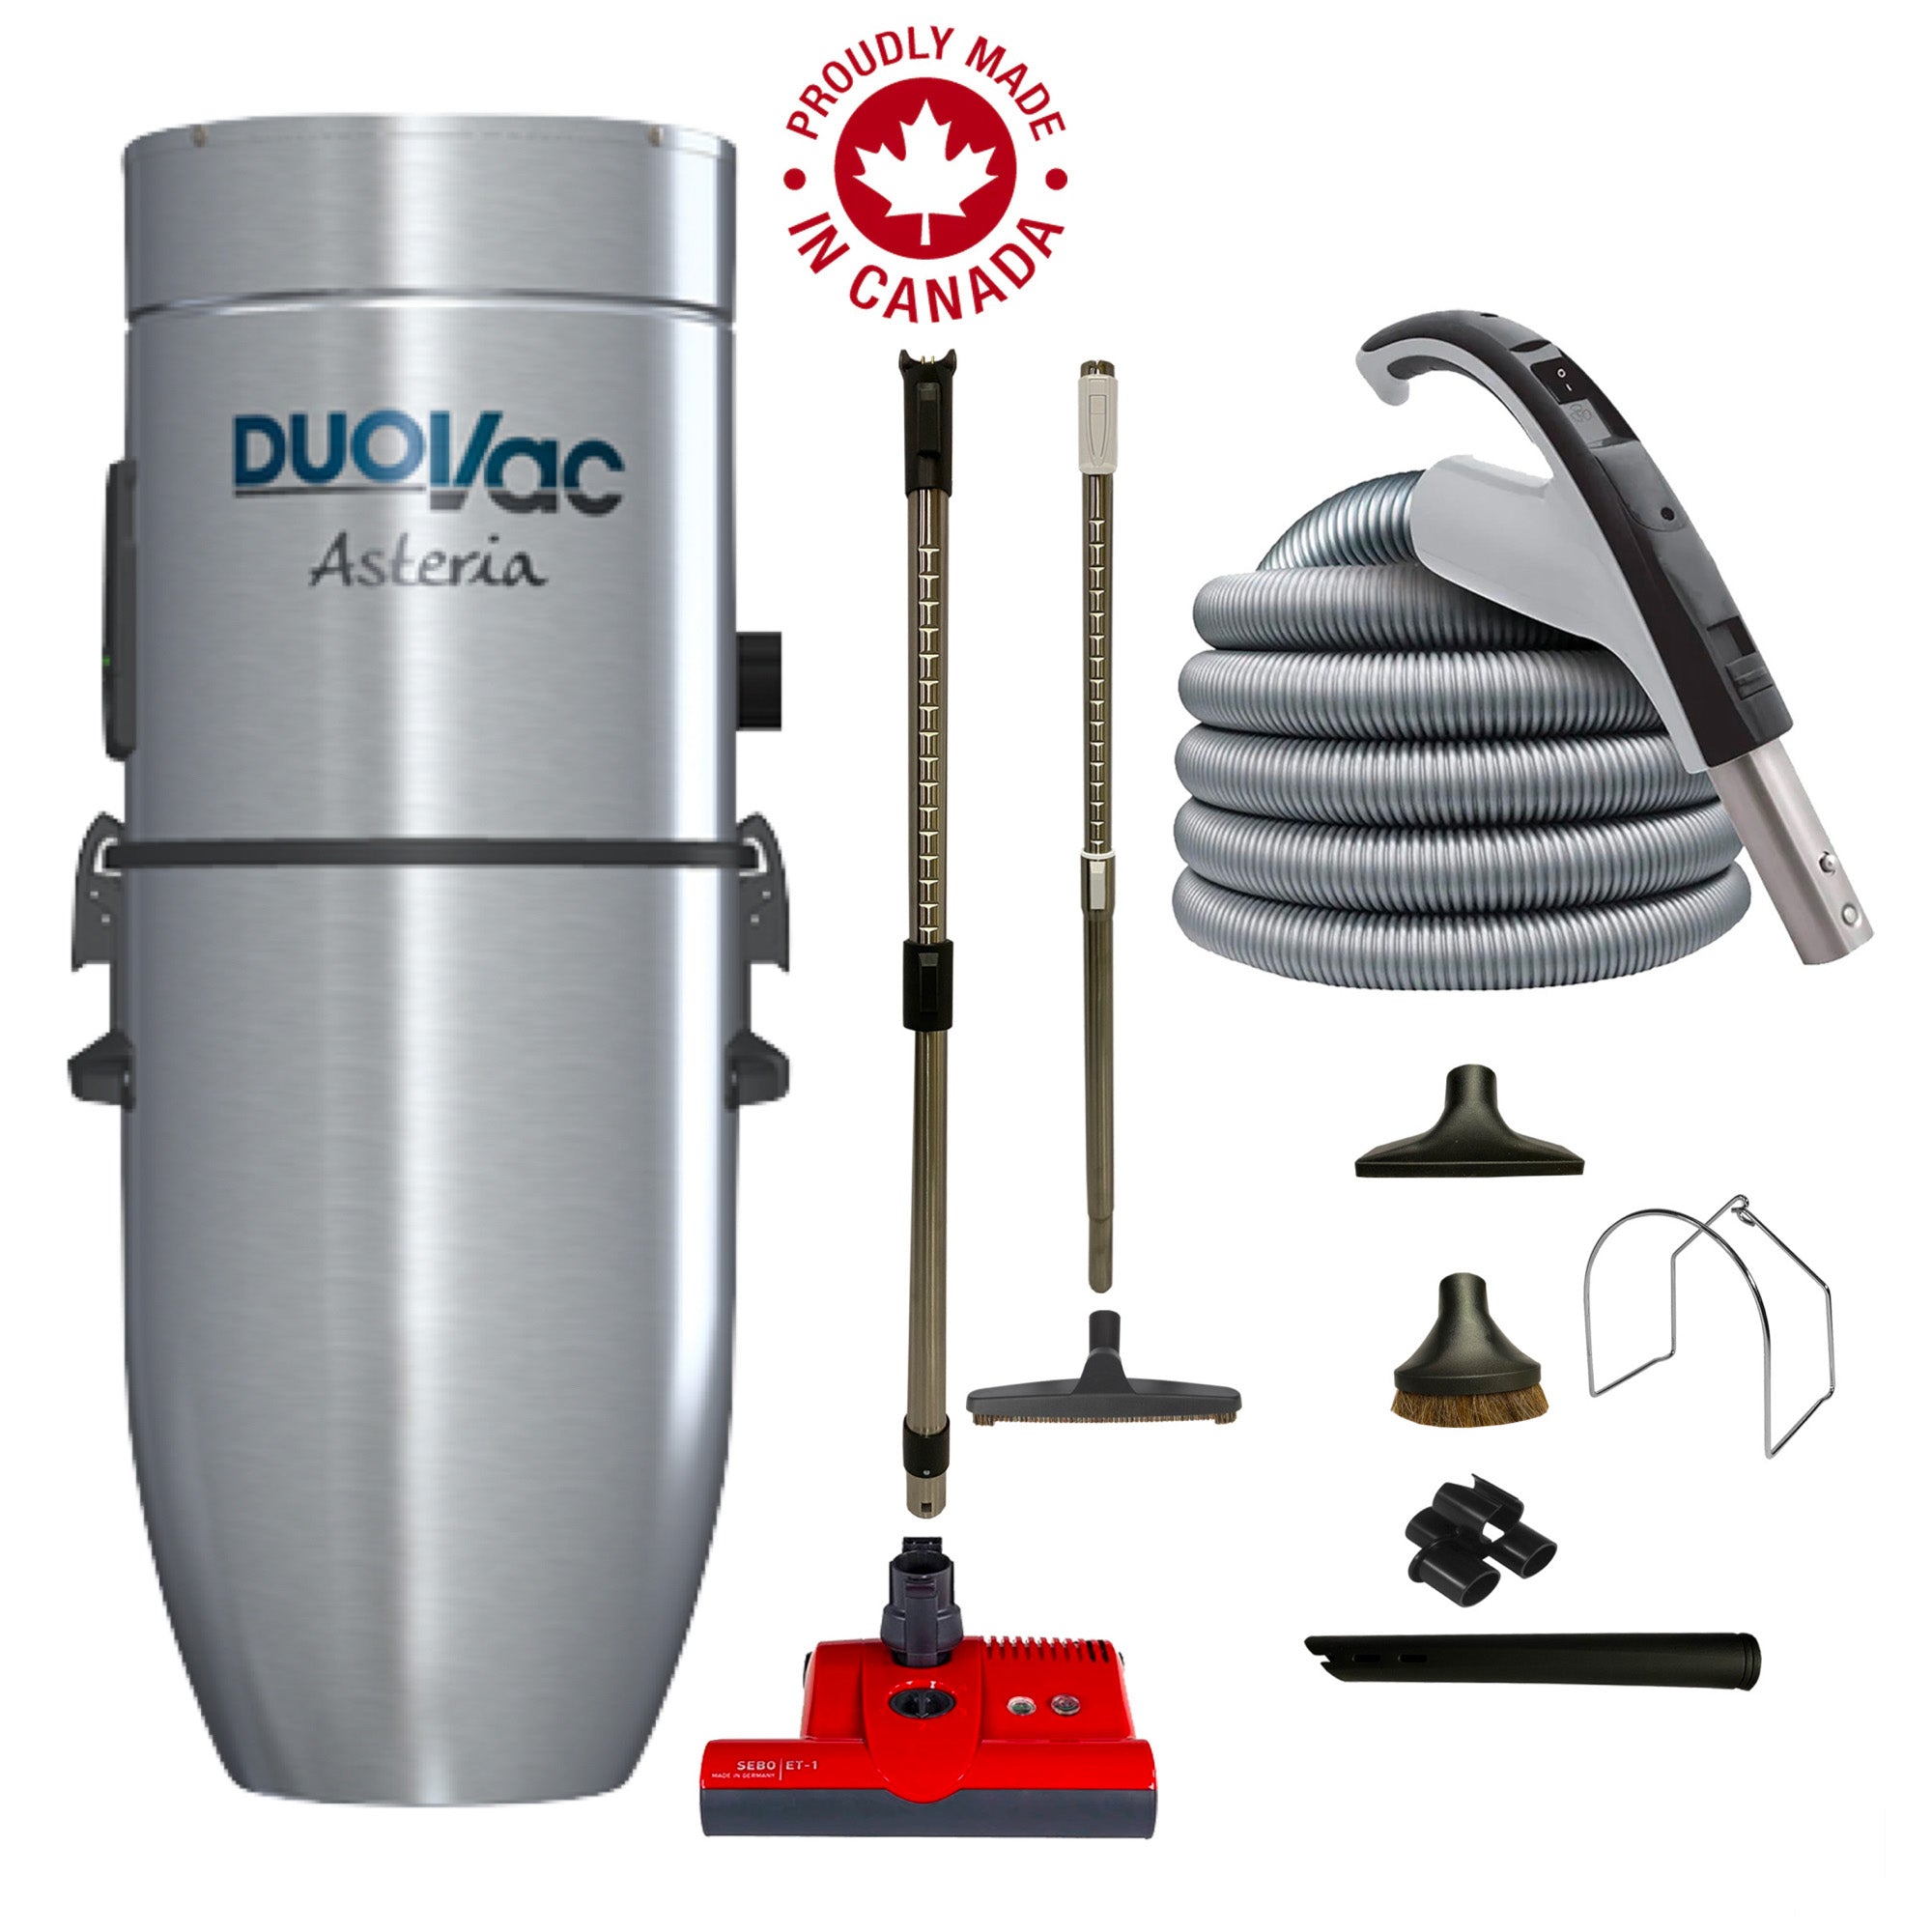 DuoVac Asteria Central Vacuum with Premium Electric Package